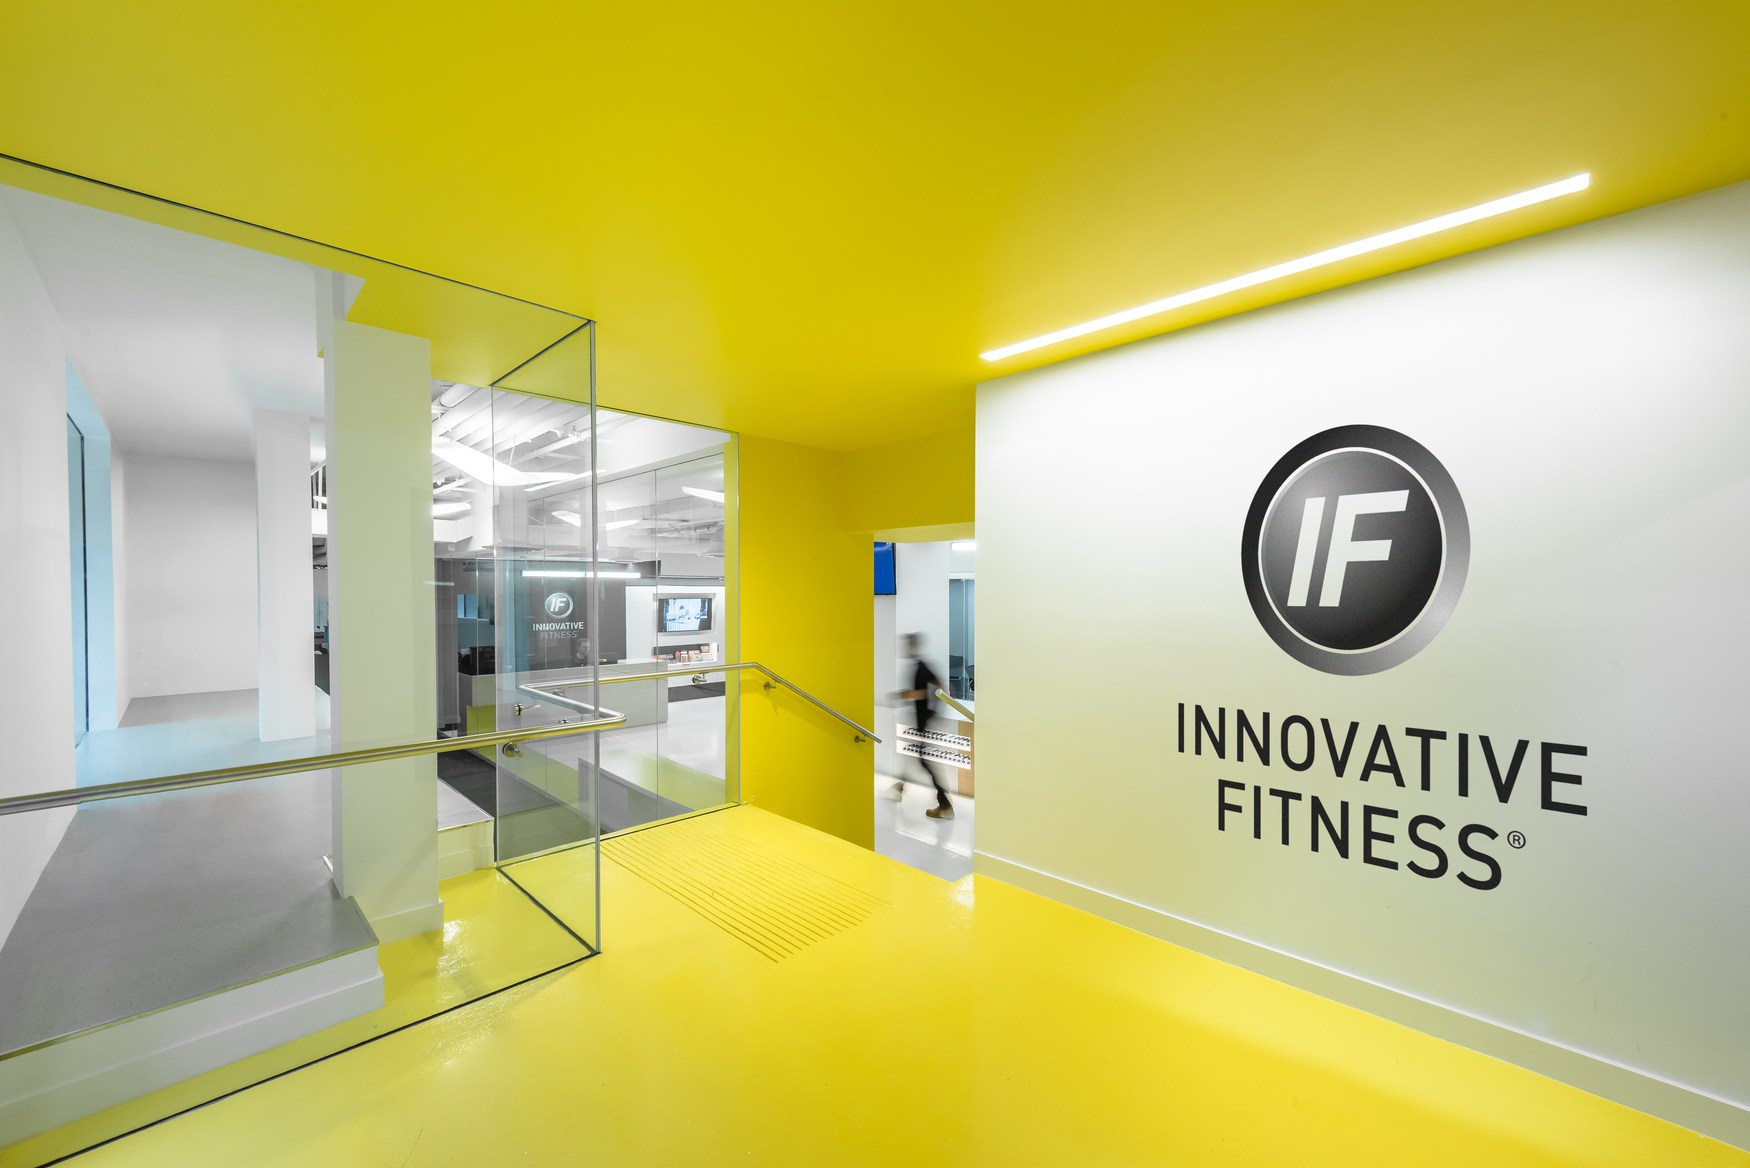 Innovative Fitness Franchise Opportunity - Group of entrepreneurs discussing franchise options in a modern office setting.